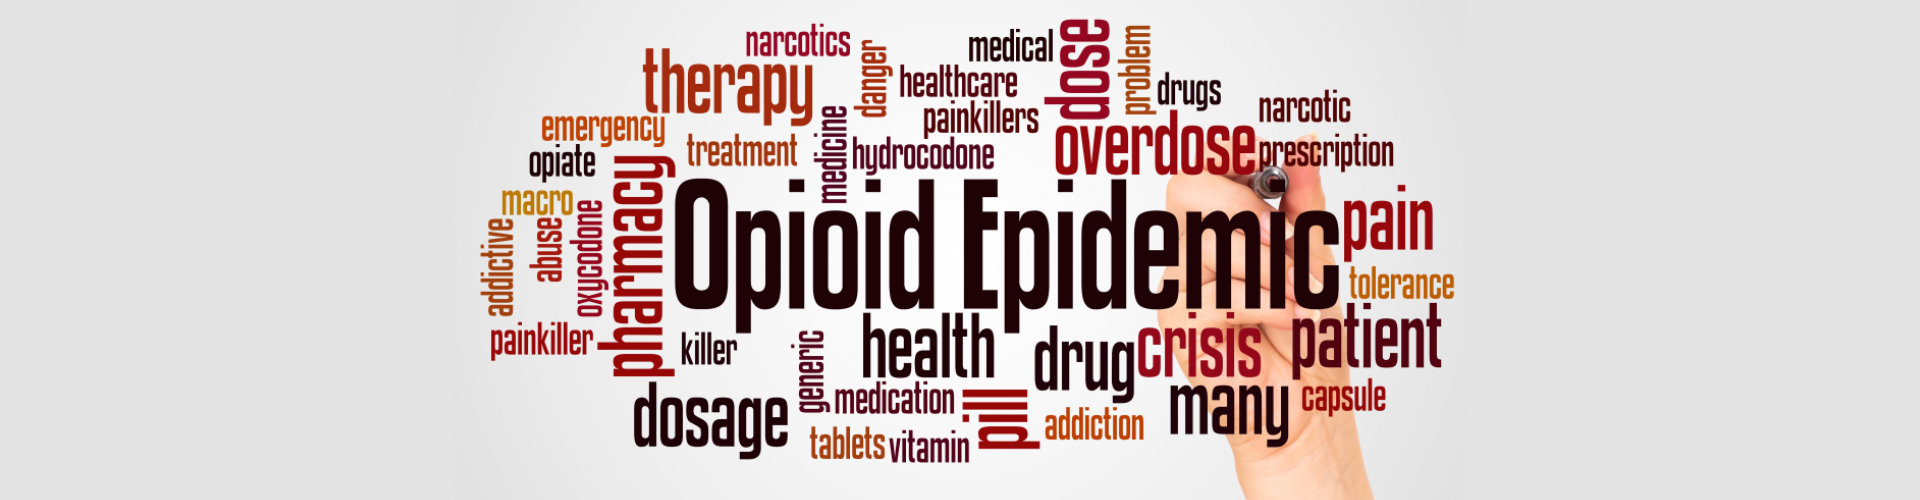 words relating to opioid